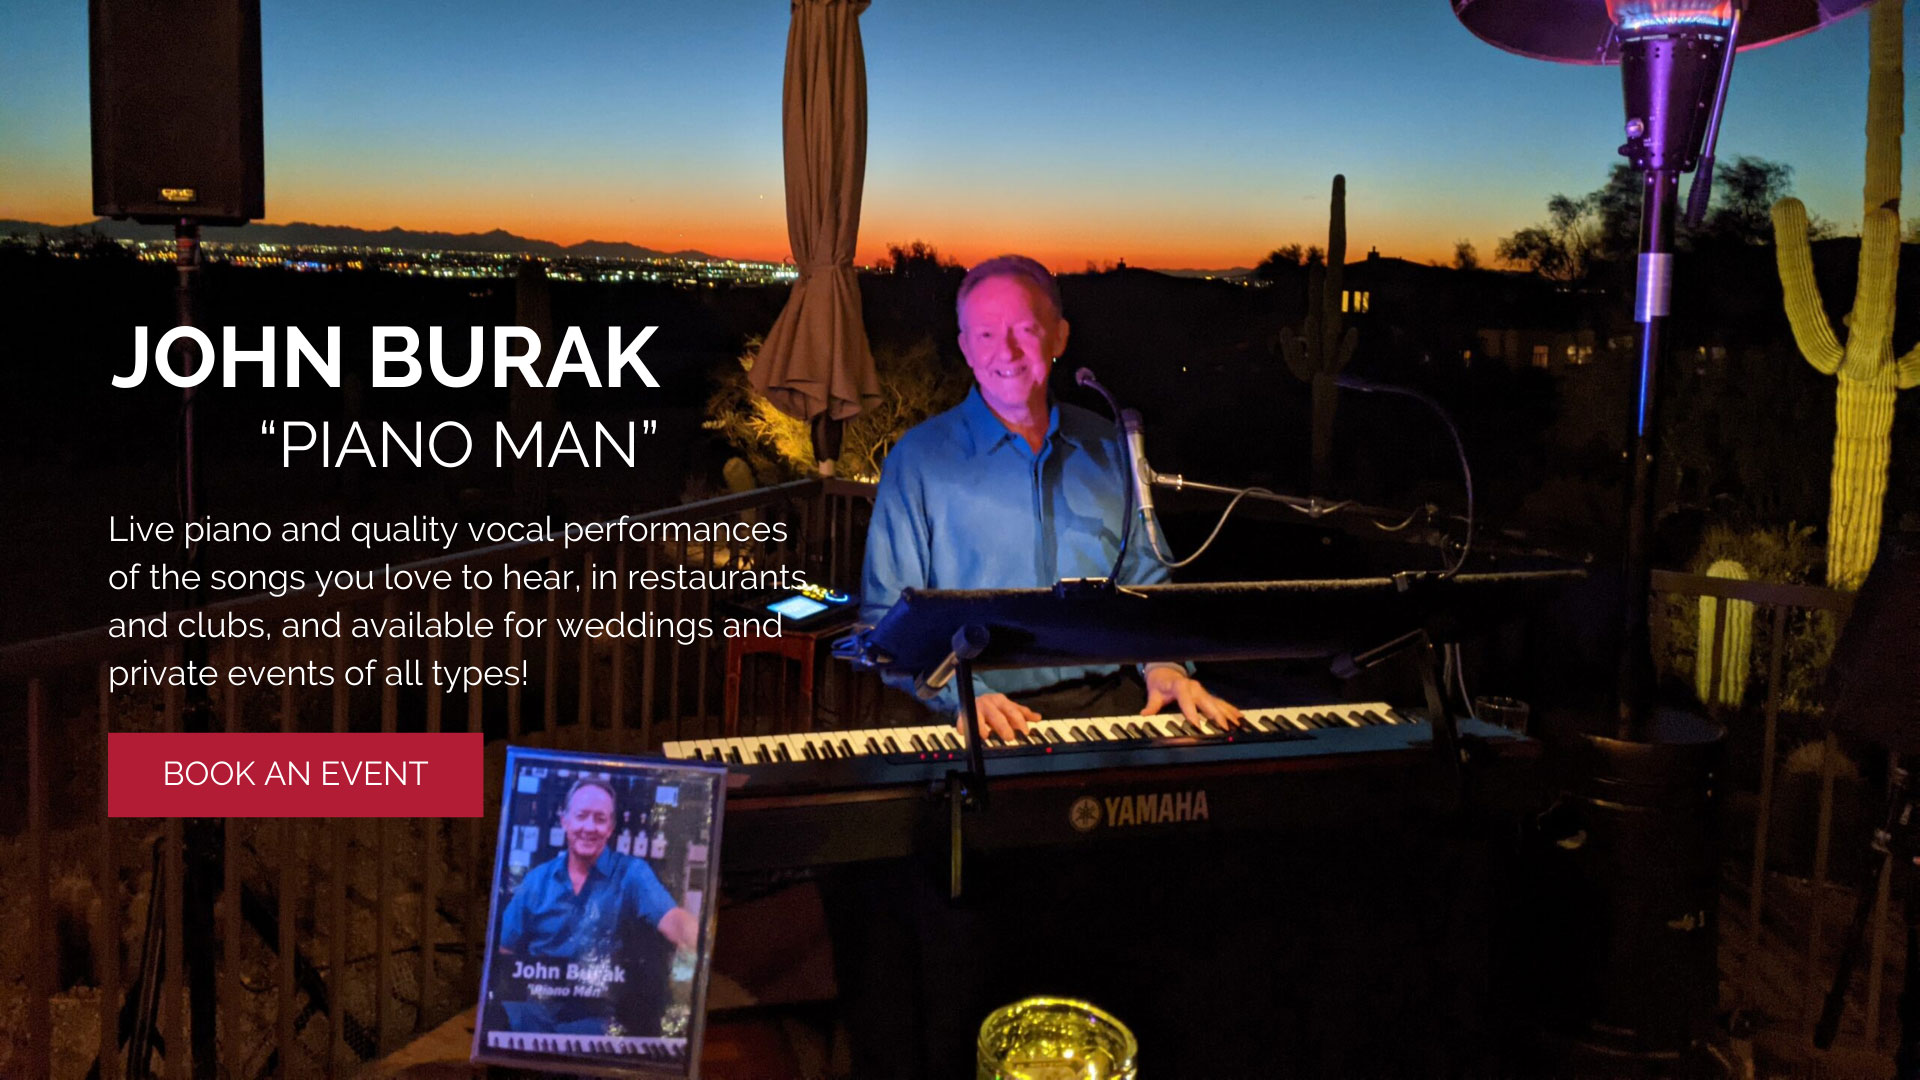 JOHN-BURAK-PIANO-MAN-Live-piano-and-quality-vocal-performances-of-the-songs-you-love-to-hear-in-restaurants-and-clubs-and-available-for-weddings-and-private-events-of-all-types